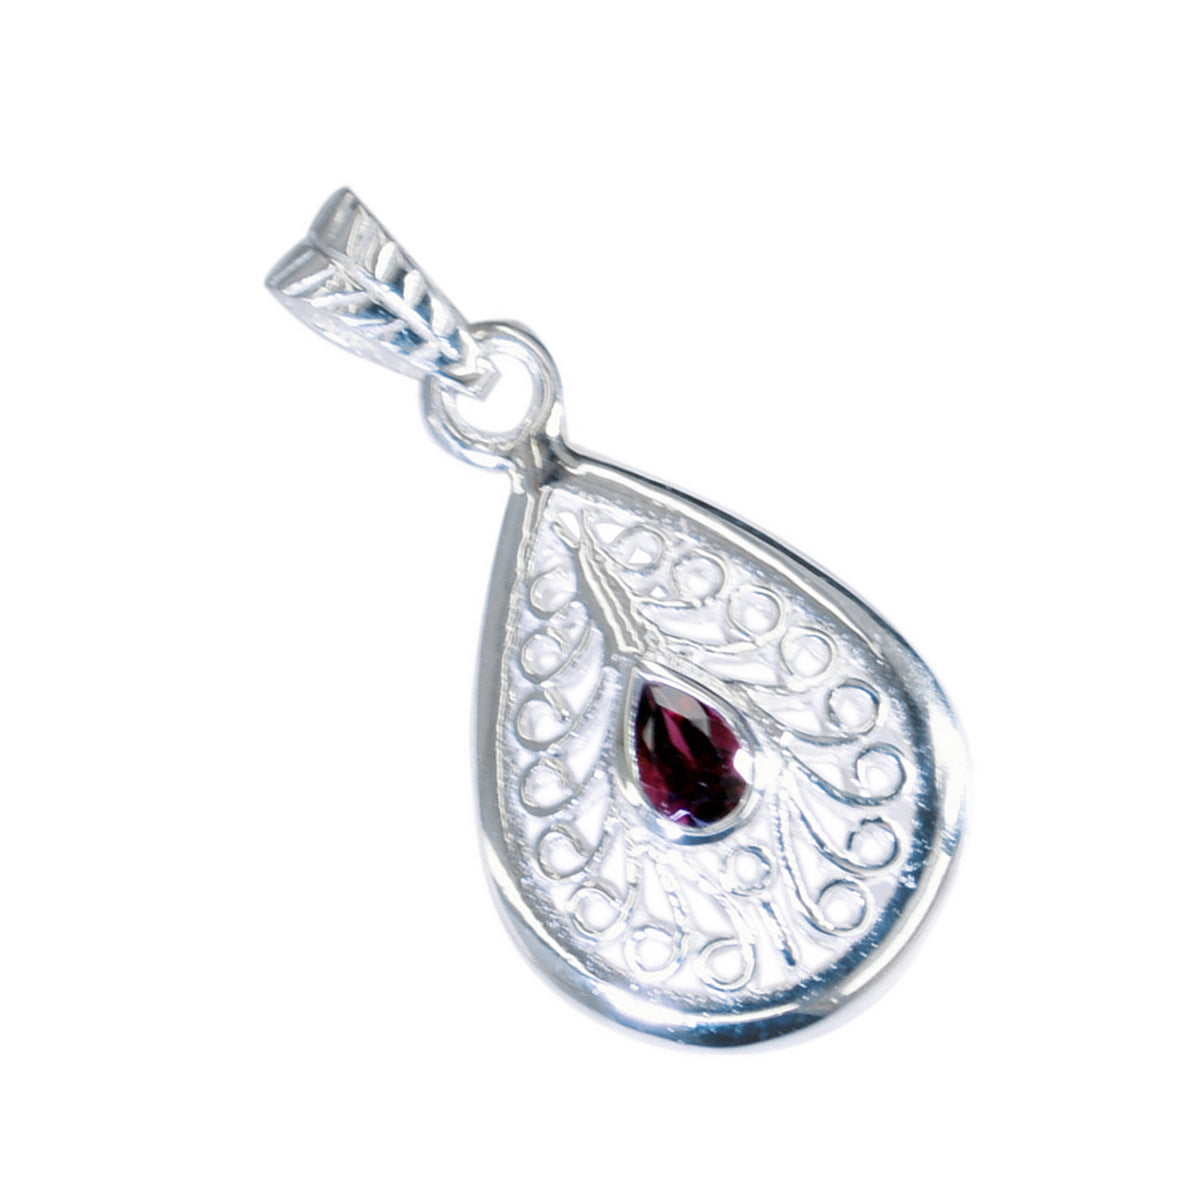 Riyo Foxy Gems Pear Faceted Red Garnet Solid Silver Pendant Gift For Easter Sunday